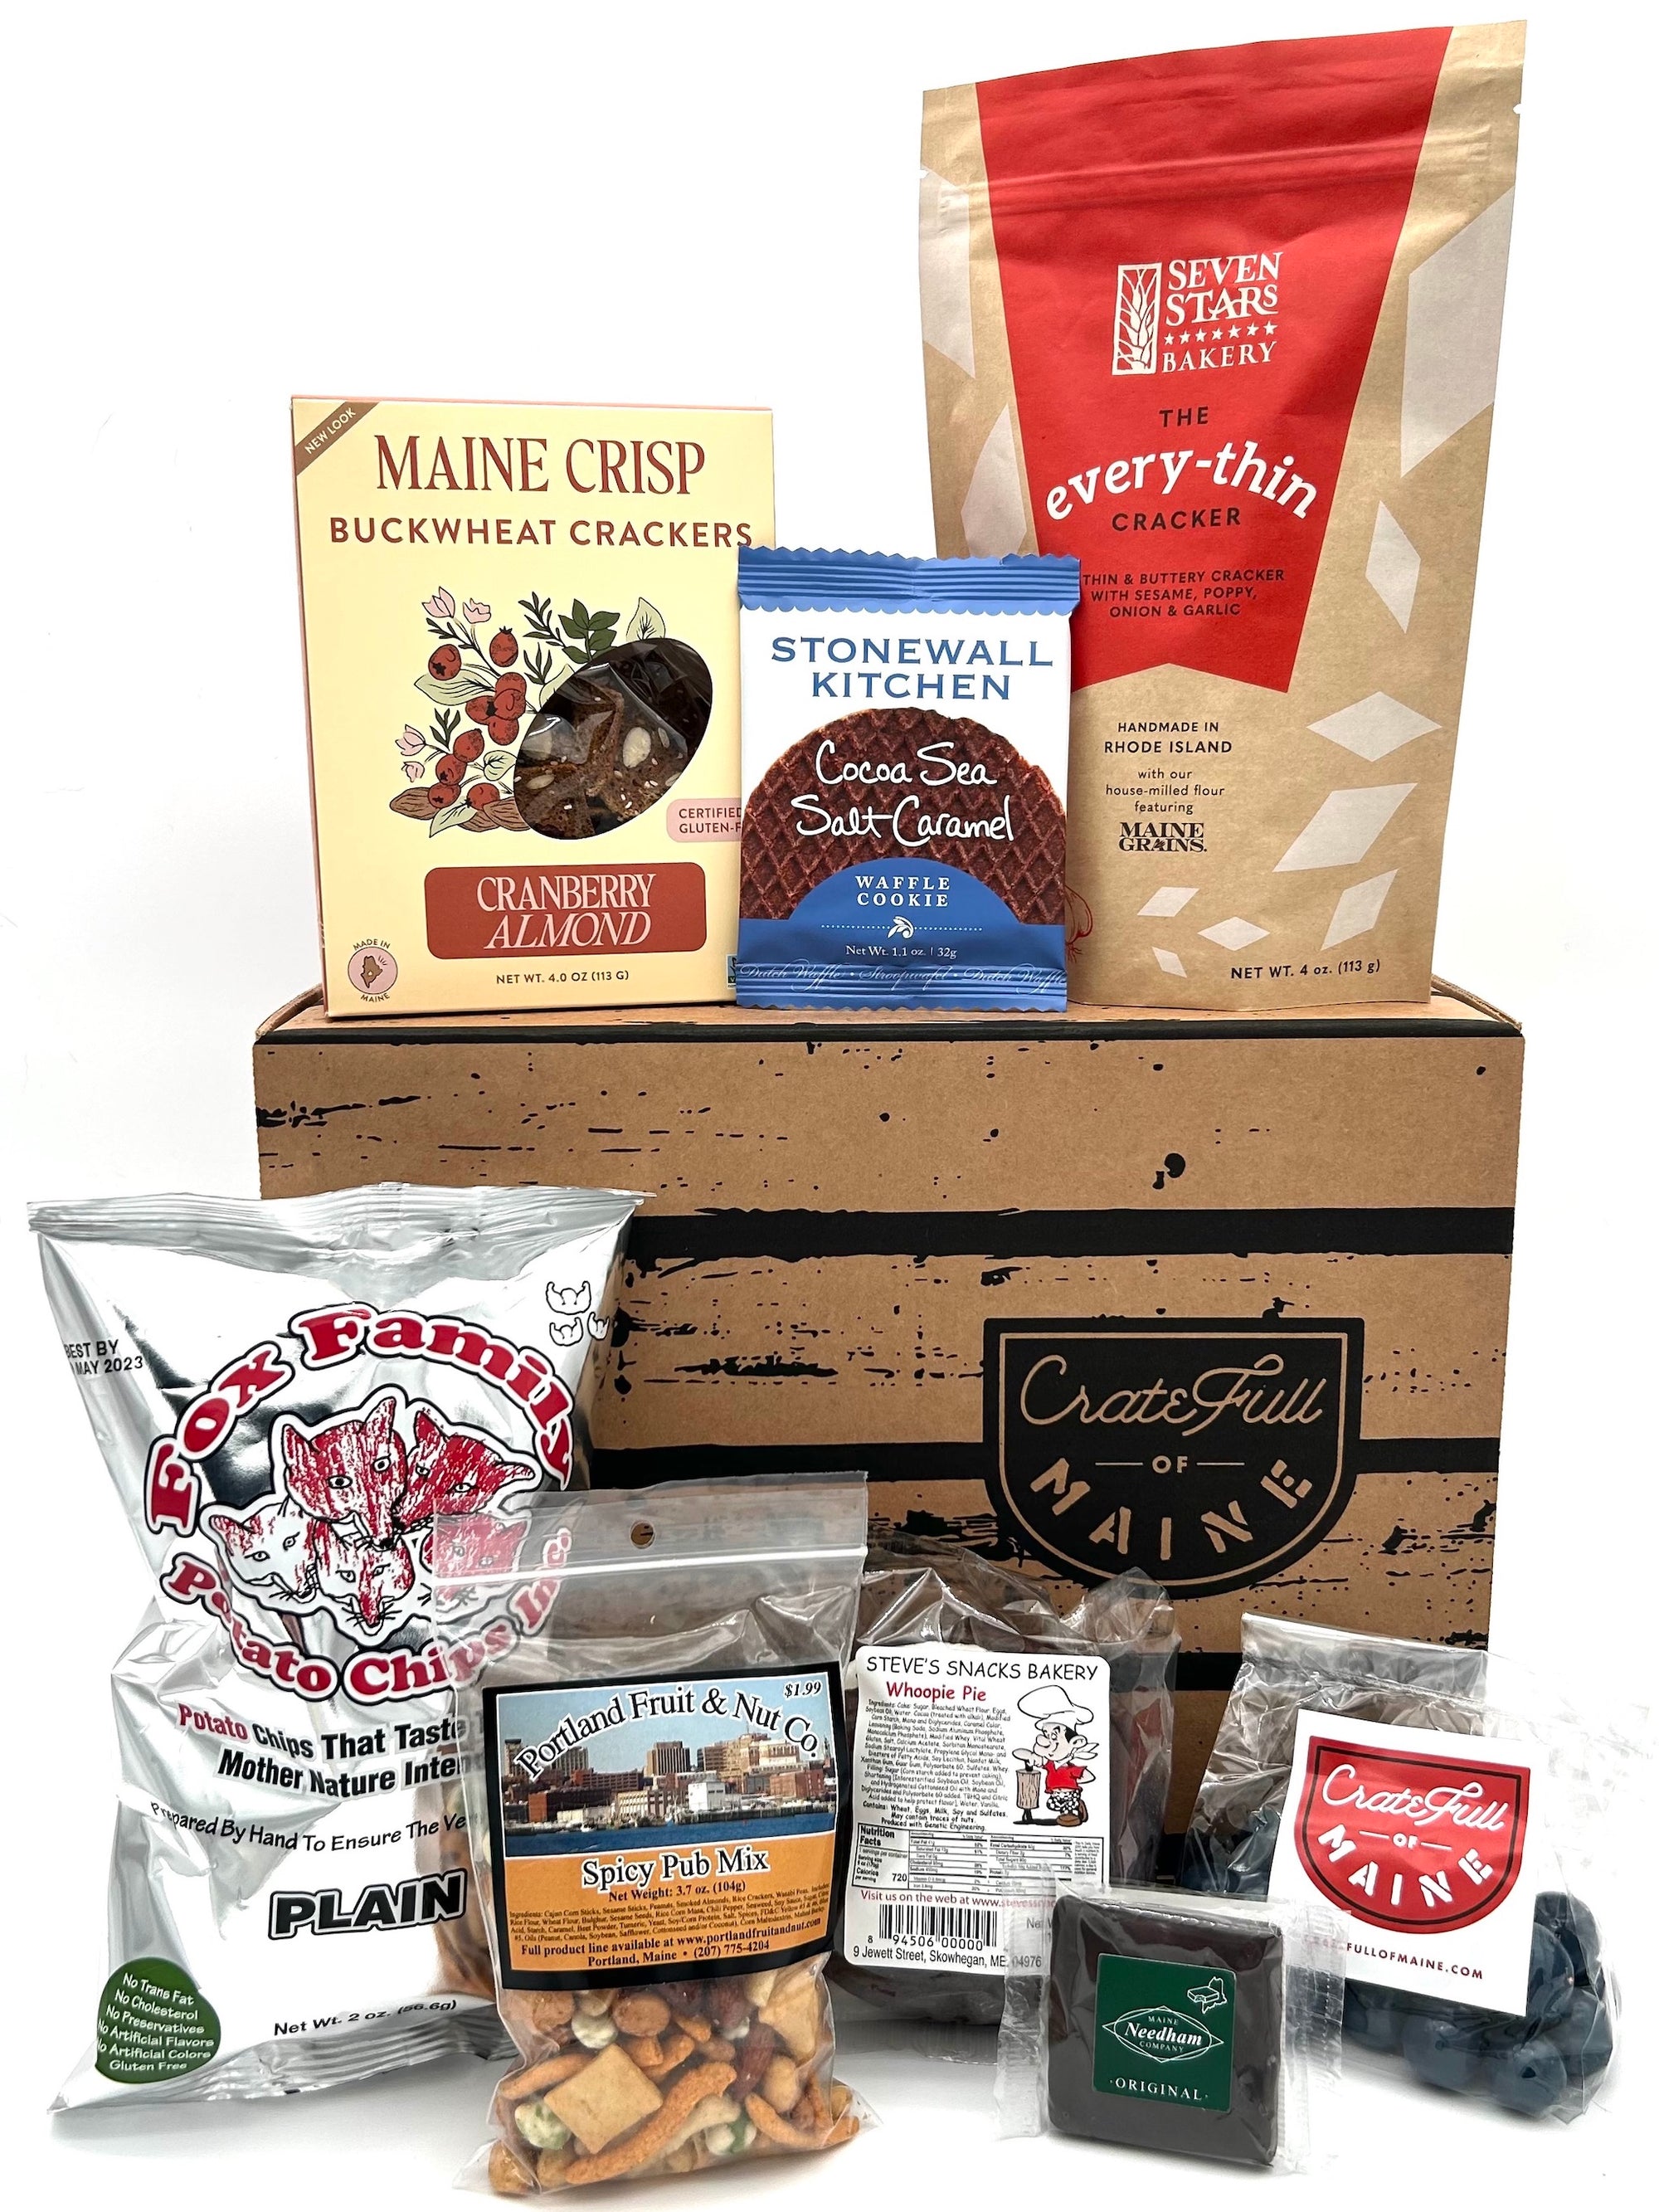 Packed with Maine inspired or Maine made snacks, this Maine Crate will be sure to hit the spot as a gift for you and yours.